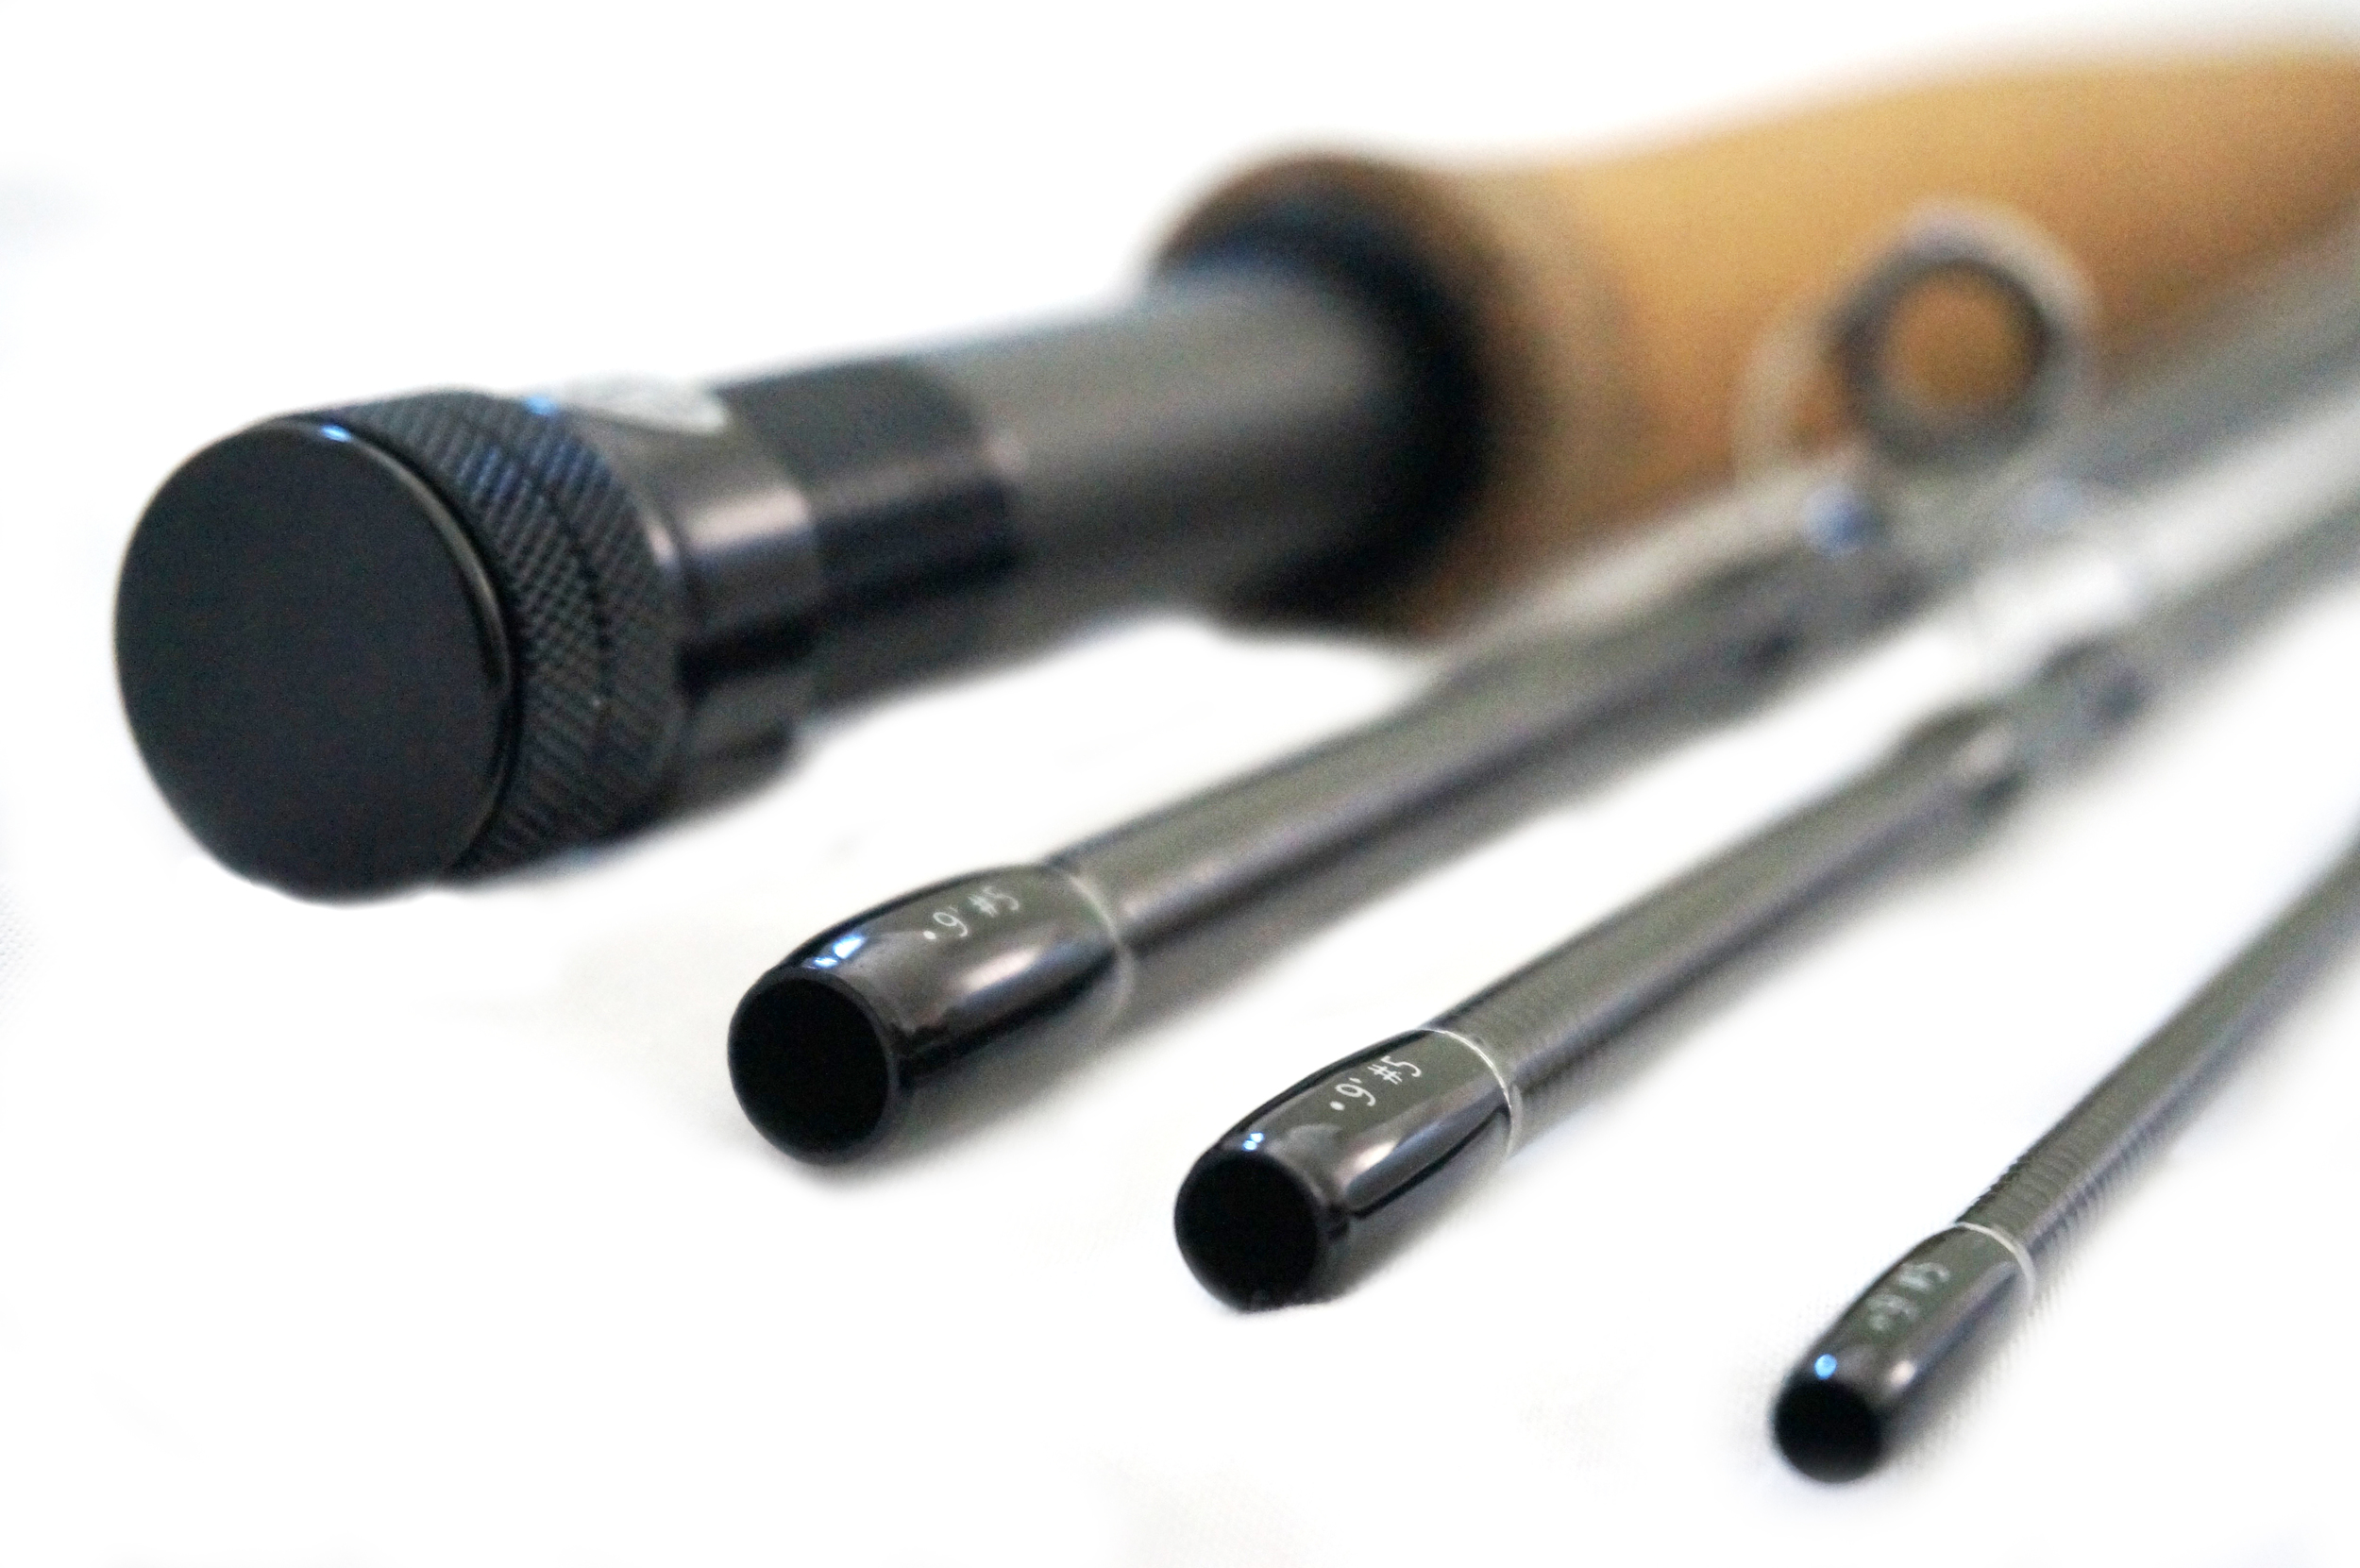 Why Taylor Rods? — Taylor Fly Fishing